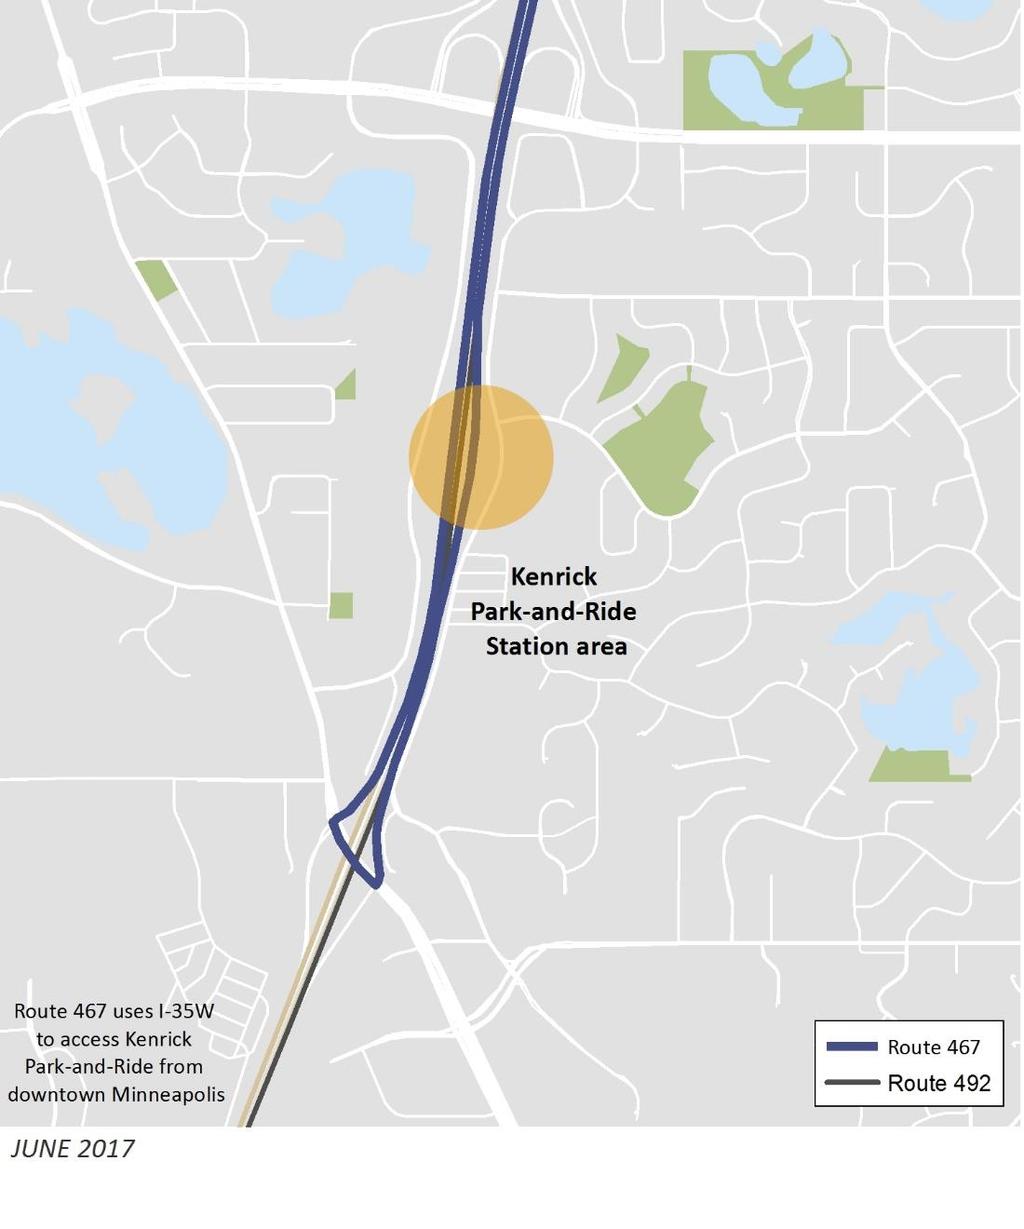 Kenrick Park & Ride Station Area Existing Transit Routes The southbound express Route 467 exits I-35W at Kenwood Trail, re-enters the freeway northbound, and drops passengers off at the transit-only